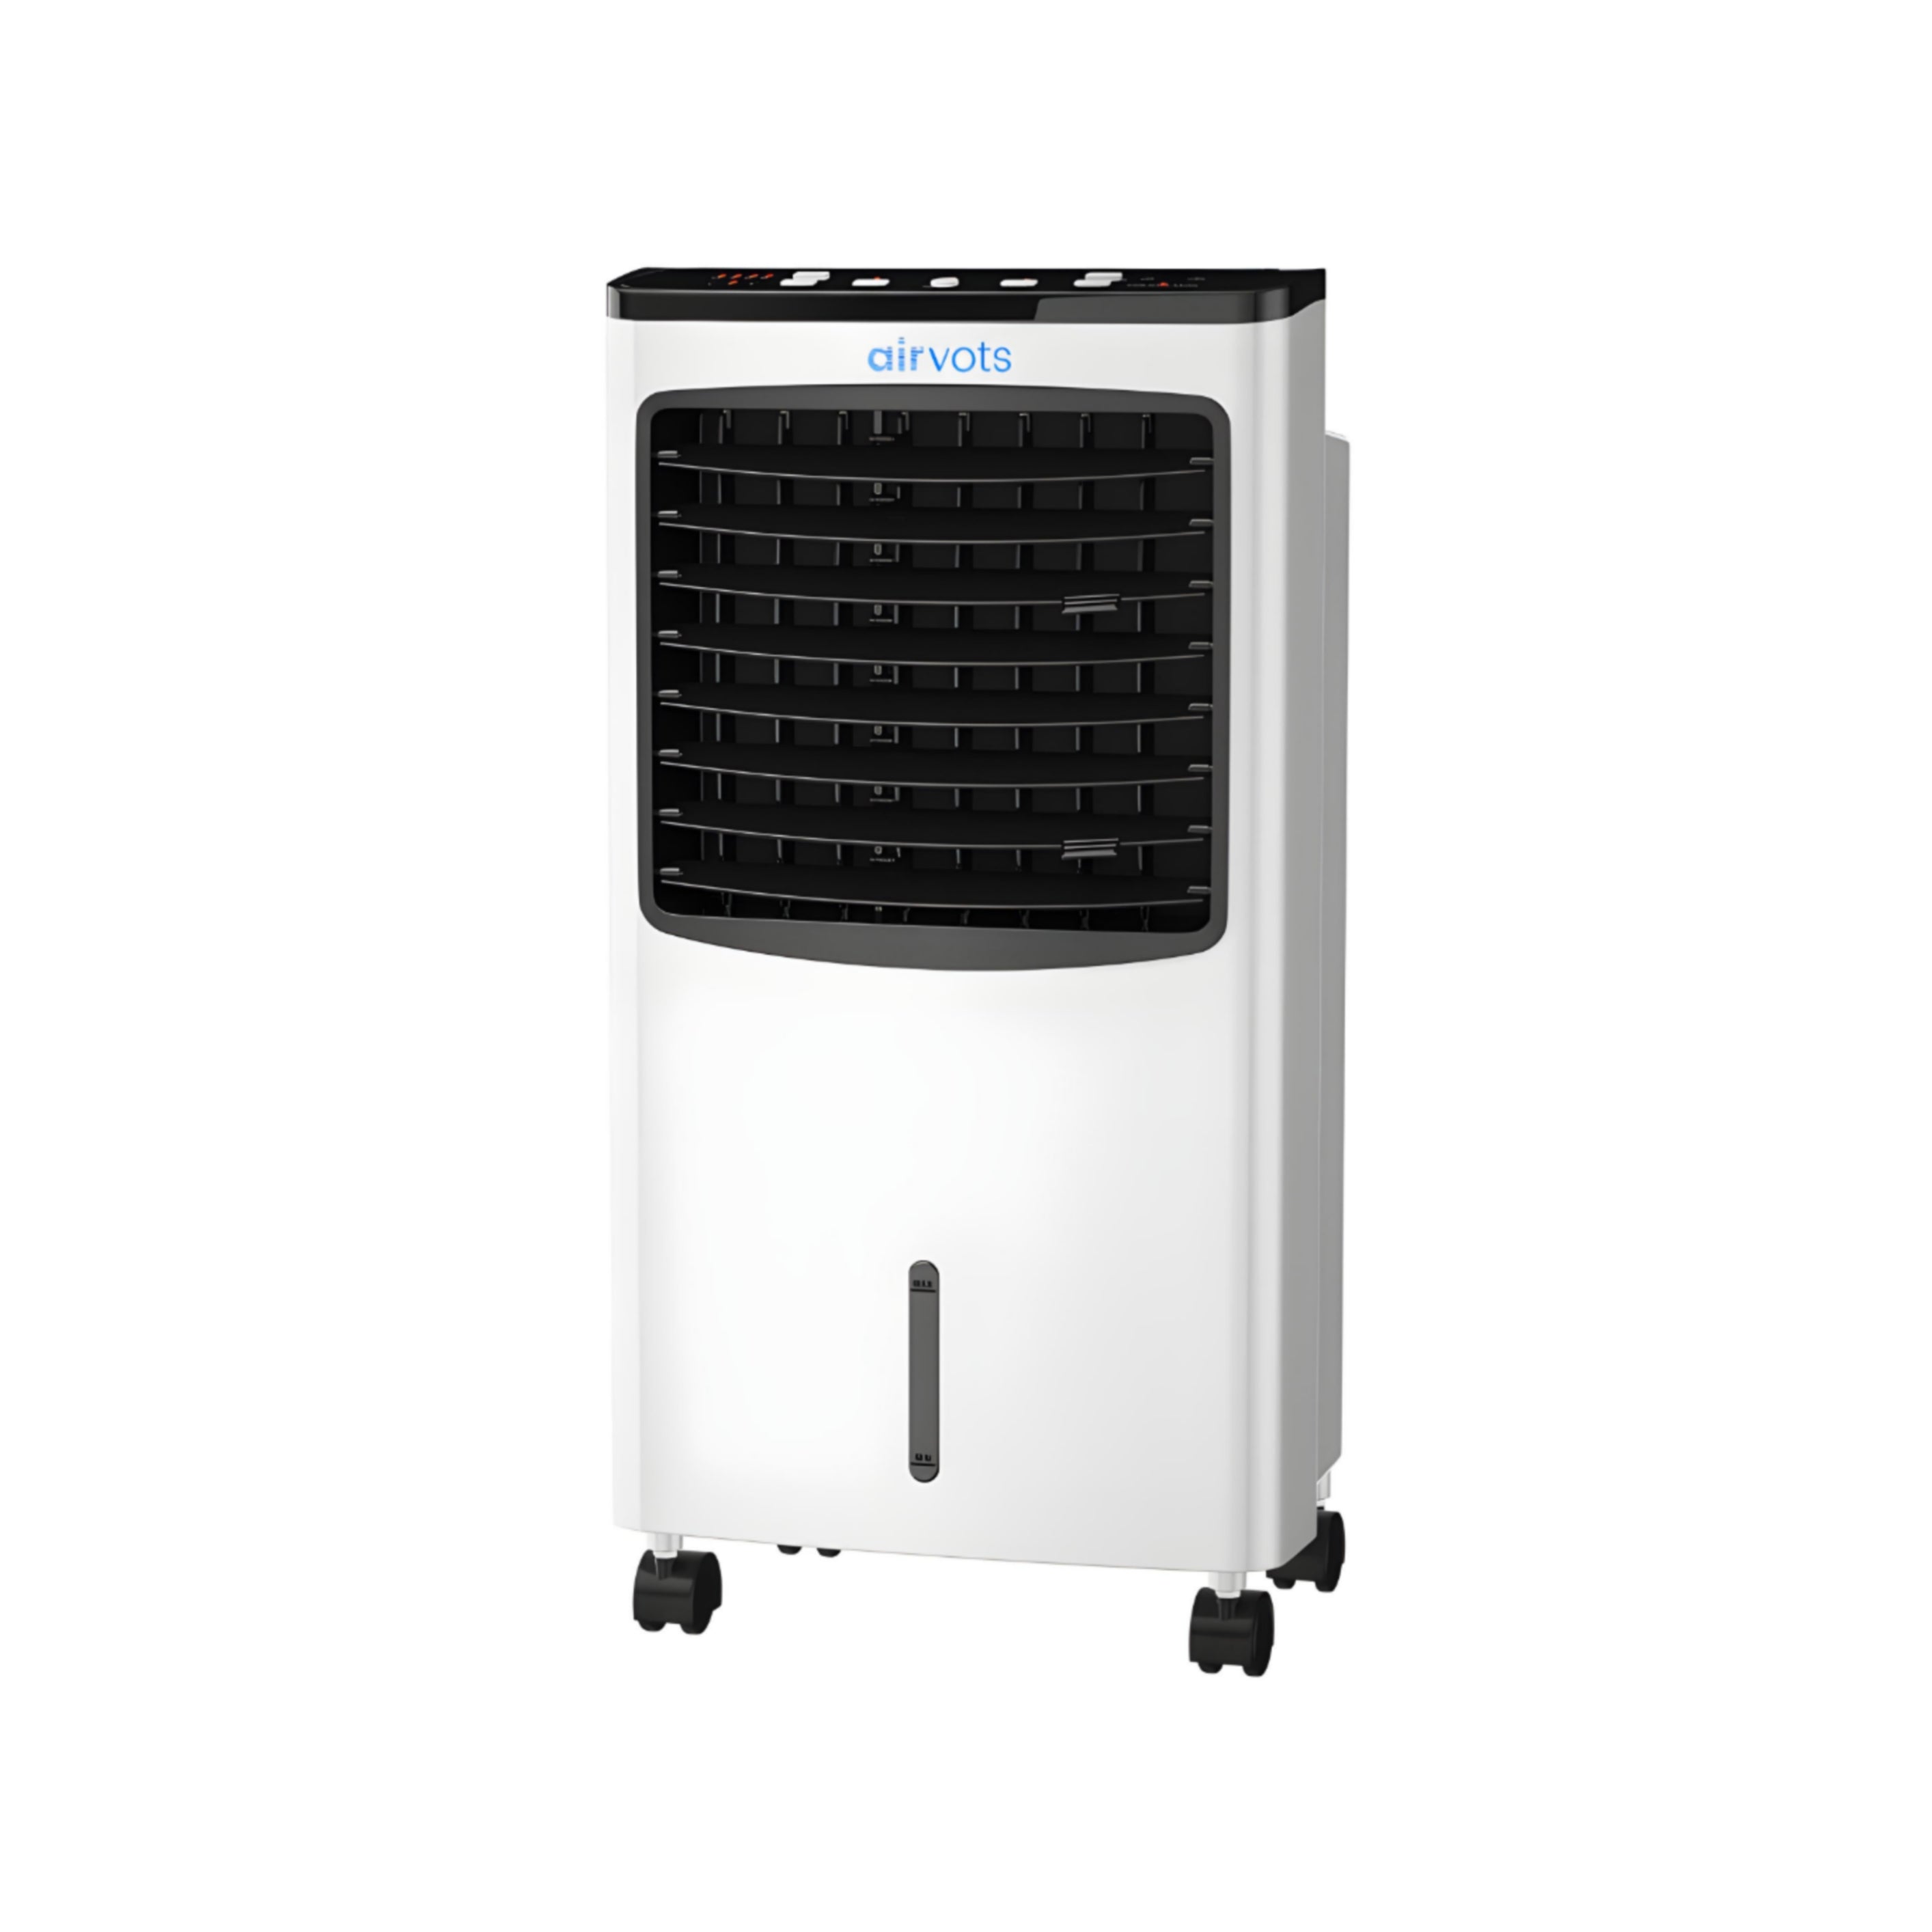 Airvots 3-in-1 Portable Evaporative Air Conditioner Cooler with Remote Control for Home